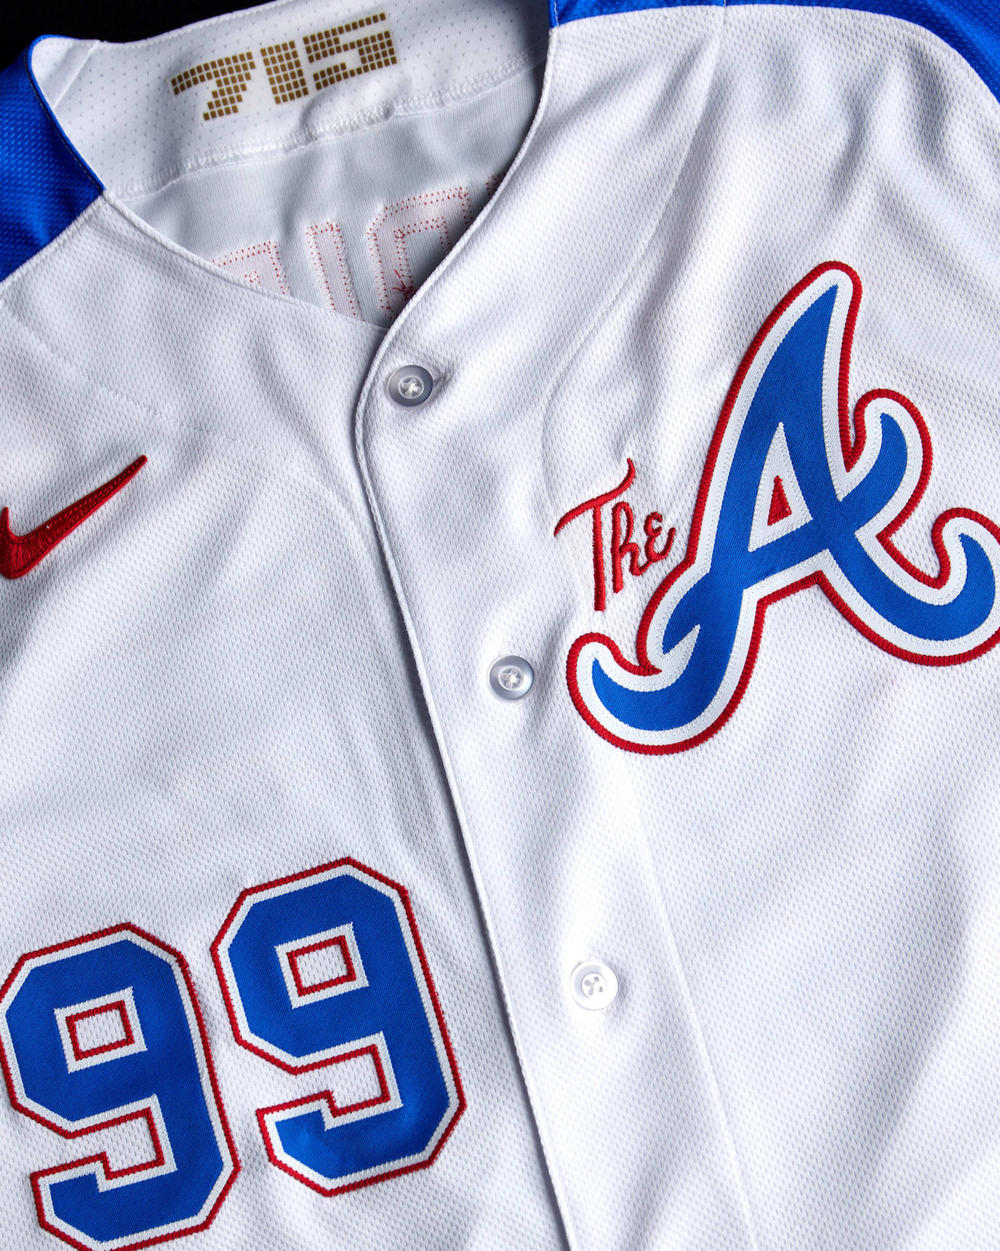 Braves unveil 'City Connect' jersey in video featuring Billye Aaron and